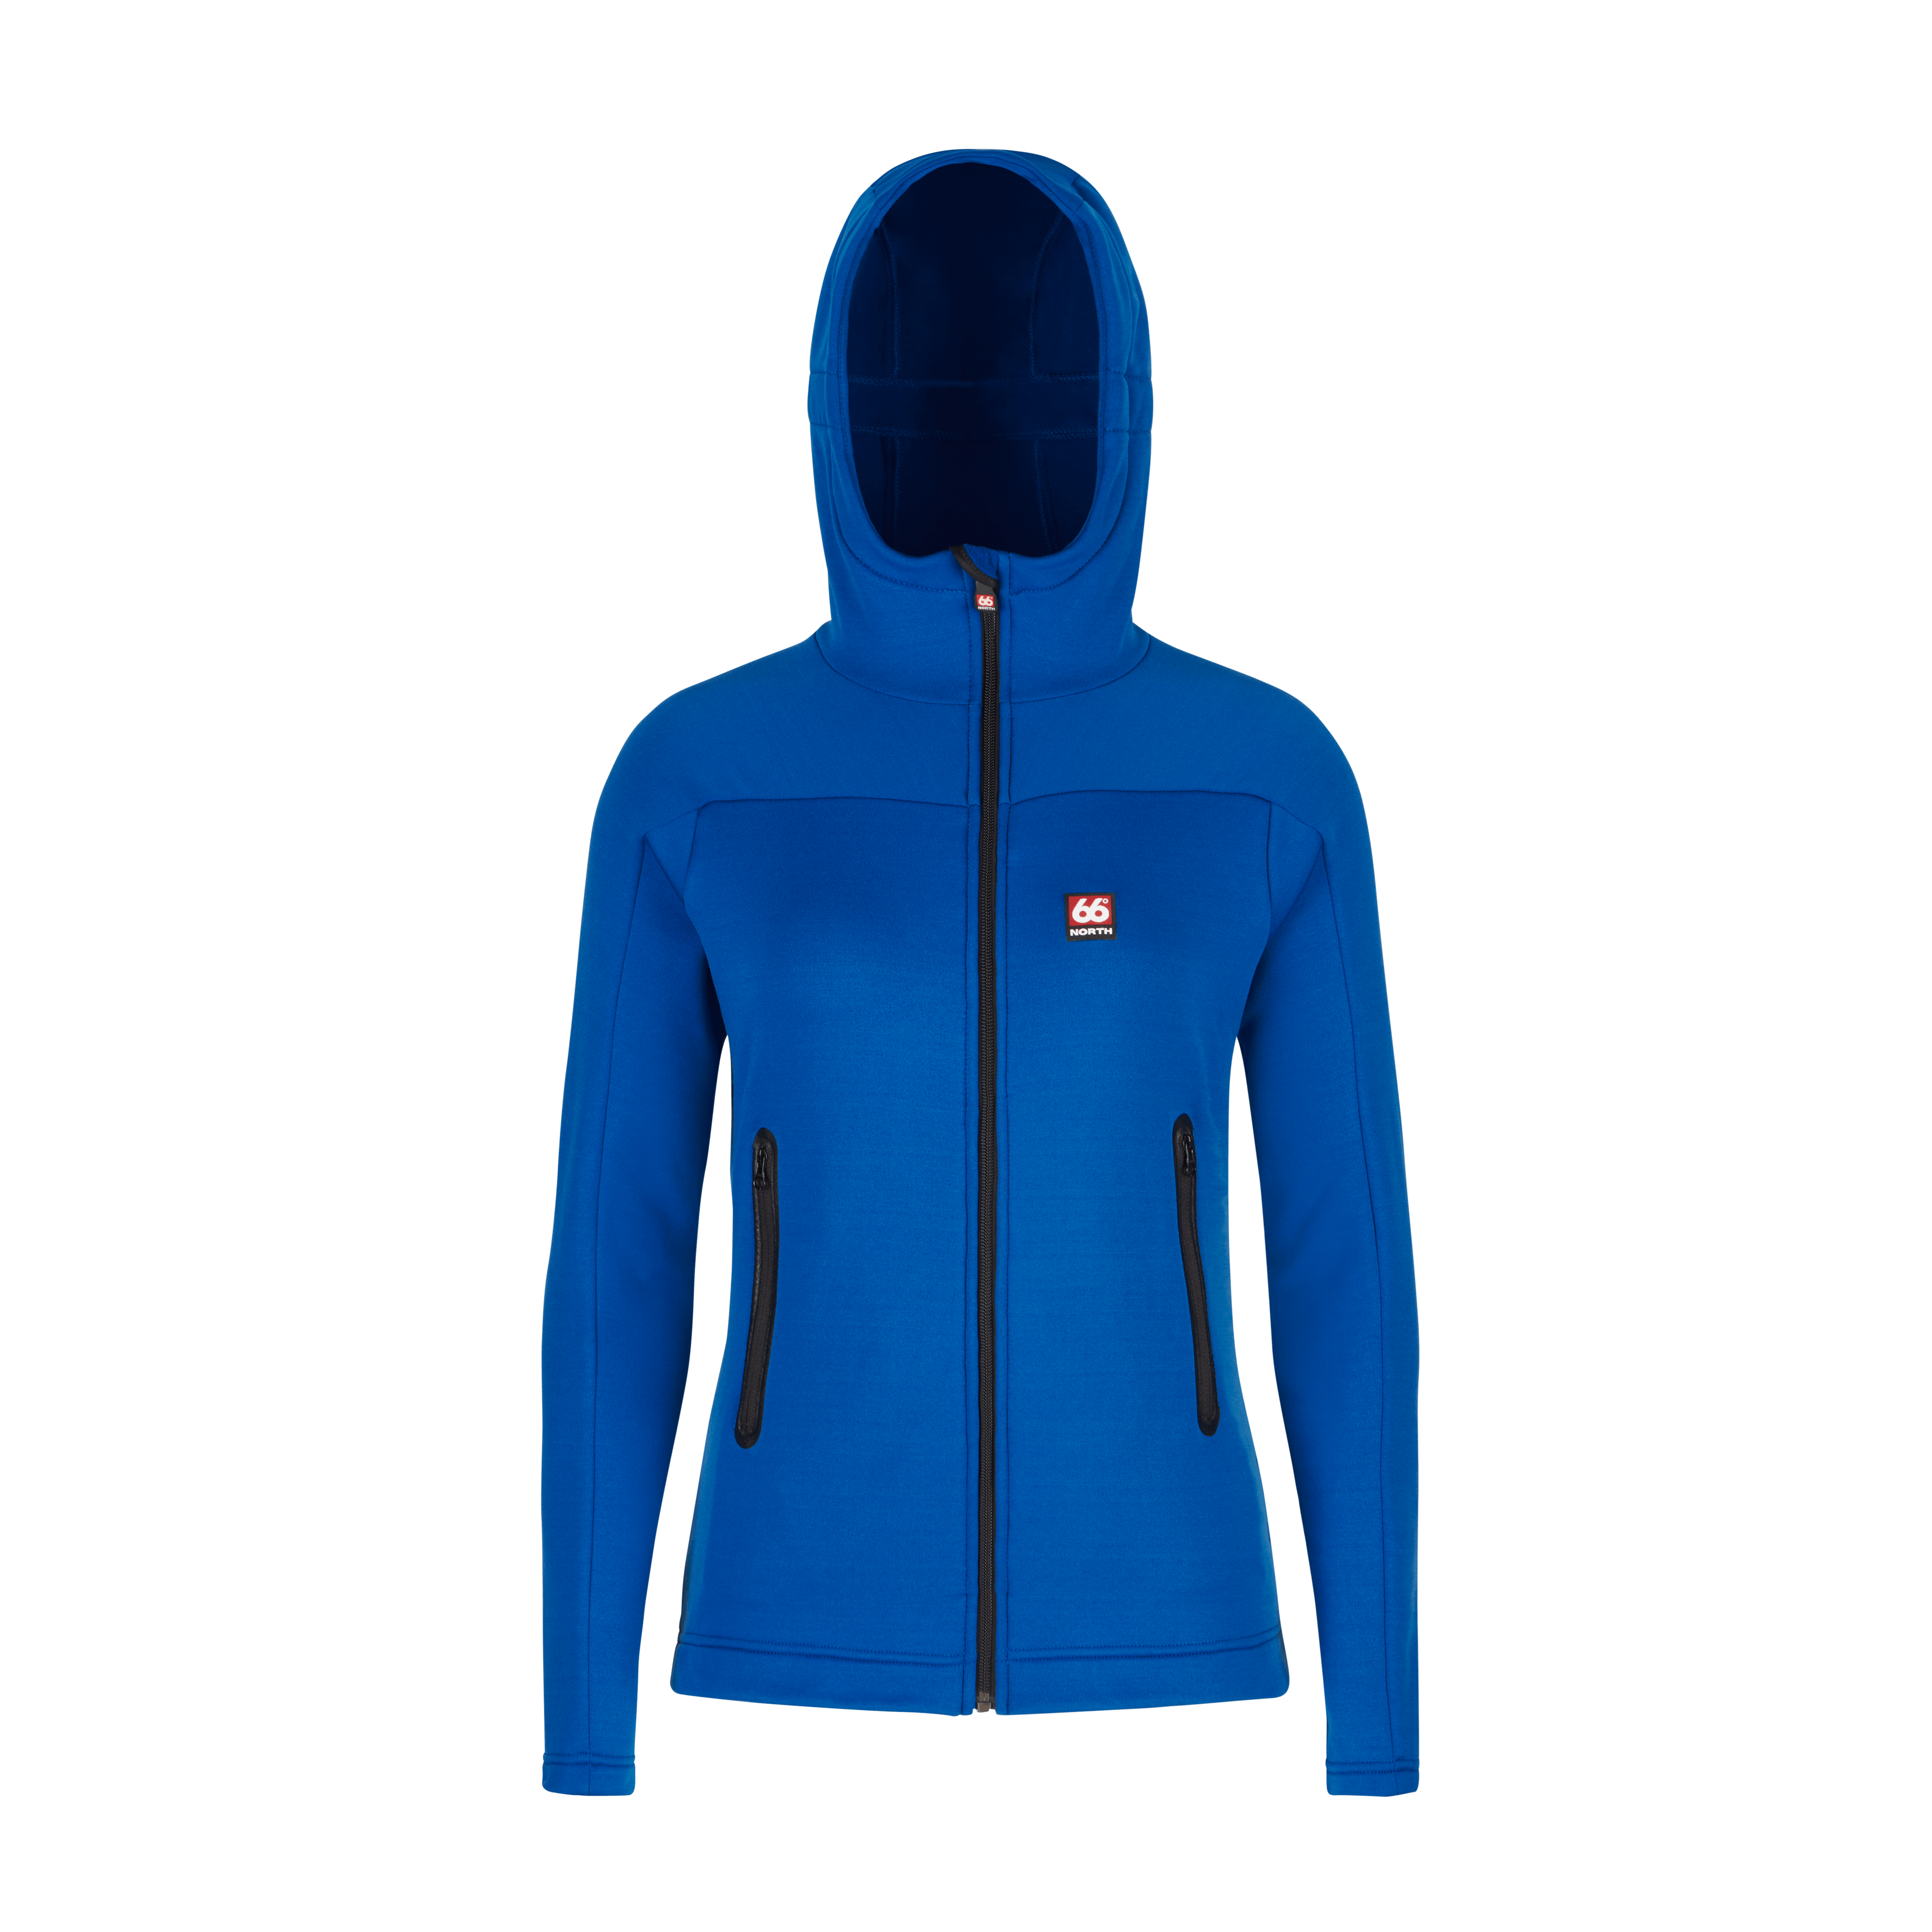 66 North Womens Snfell TopsandVests - Classic Blue - L